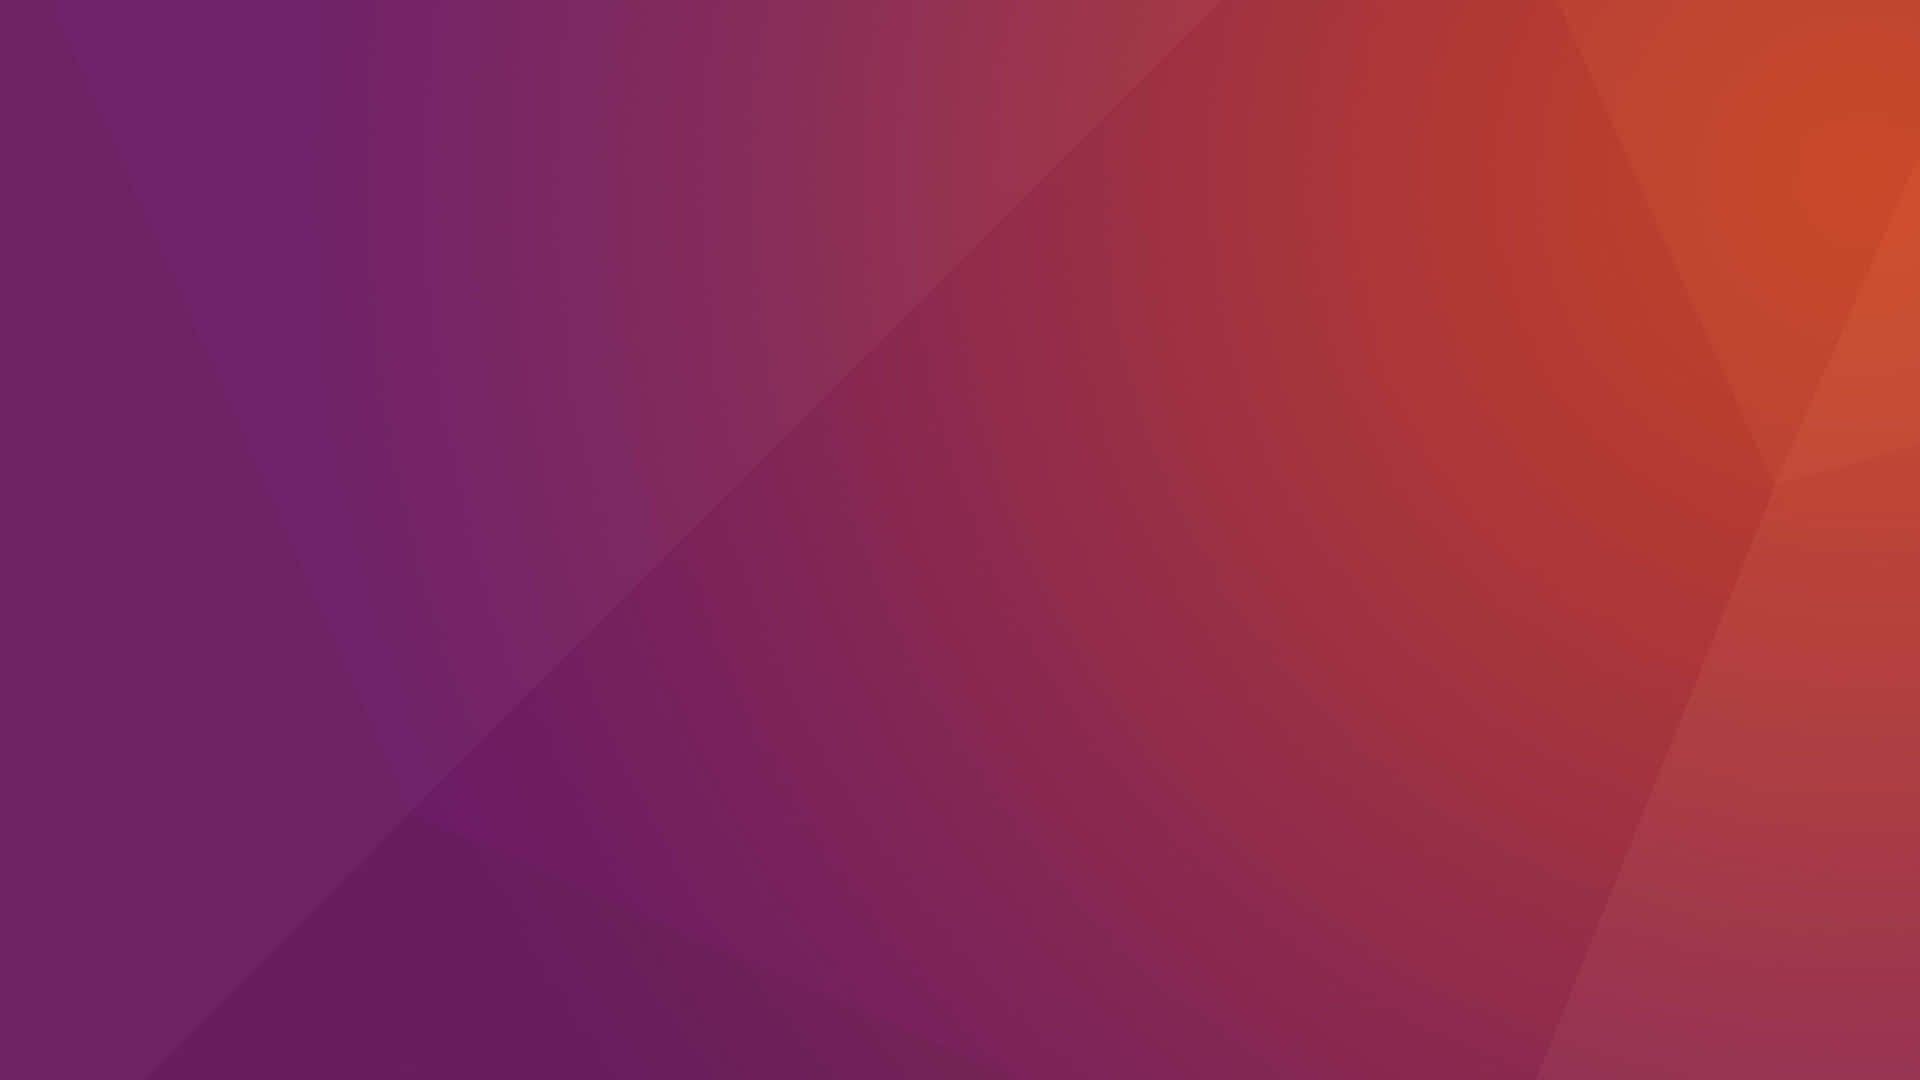 Ubuntu 4K Is the Latest Update from Canonical Wallpaper